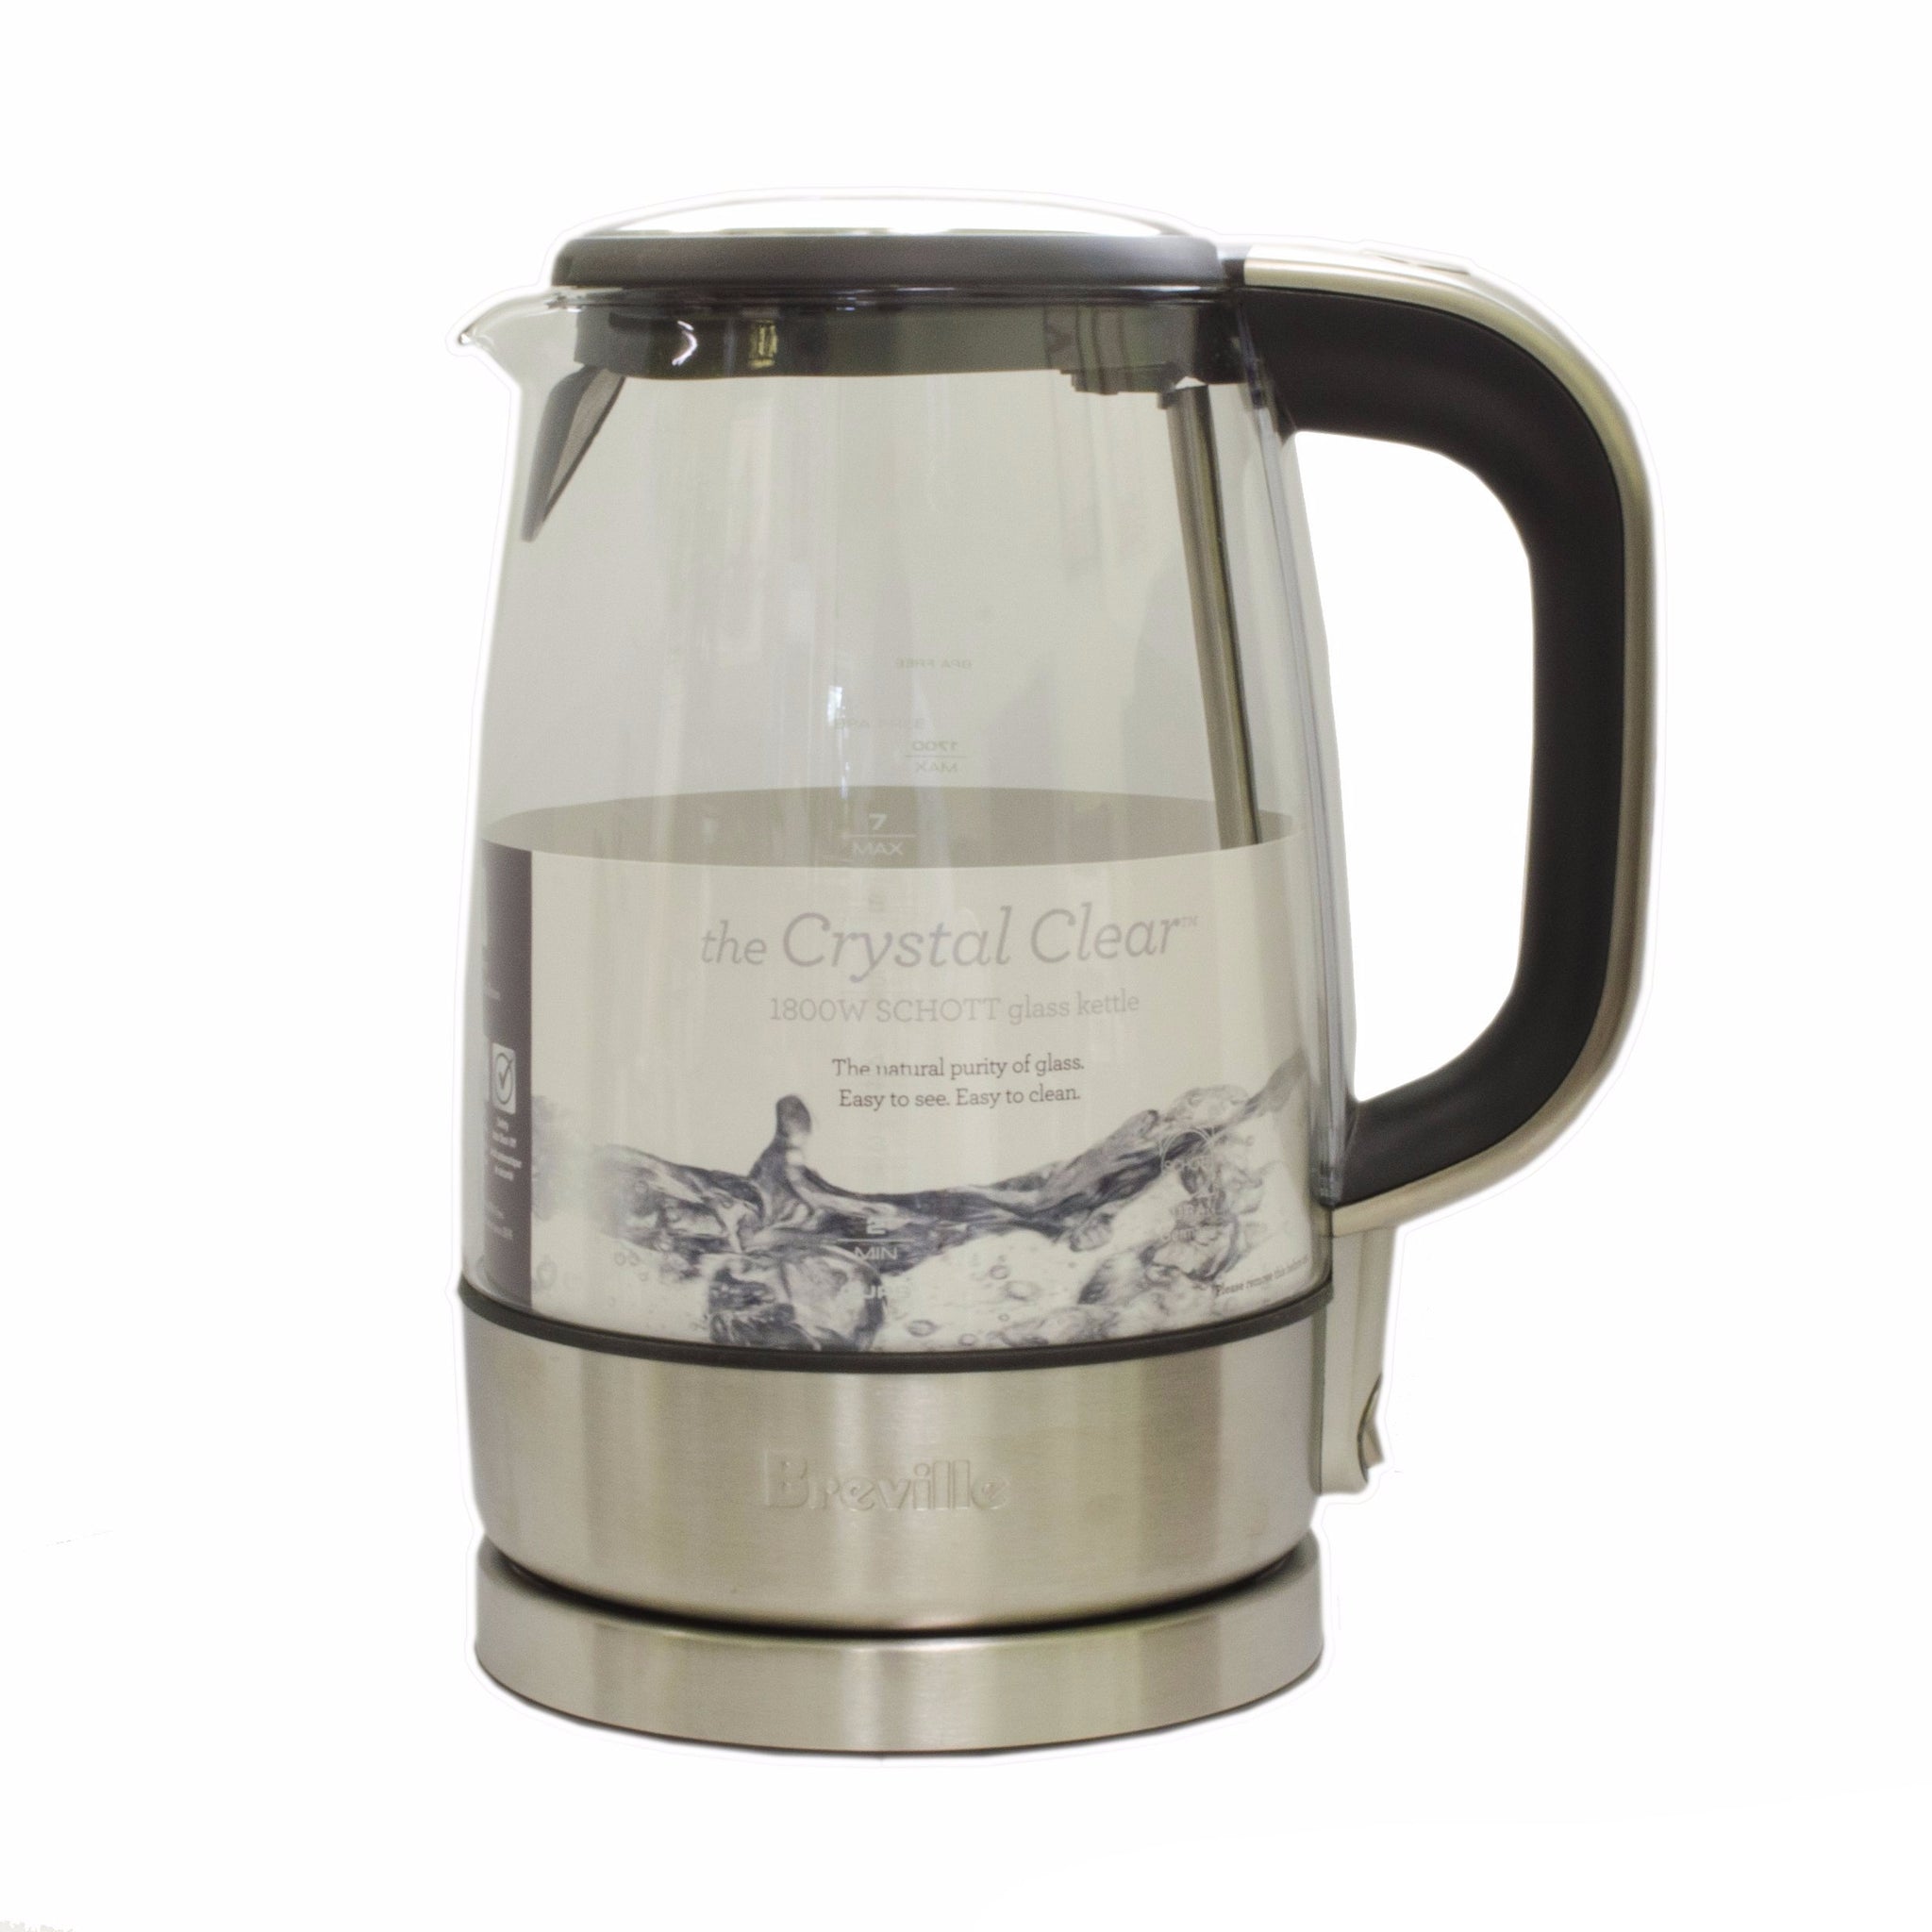 breville crystal clear glass kettle